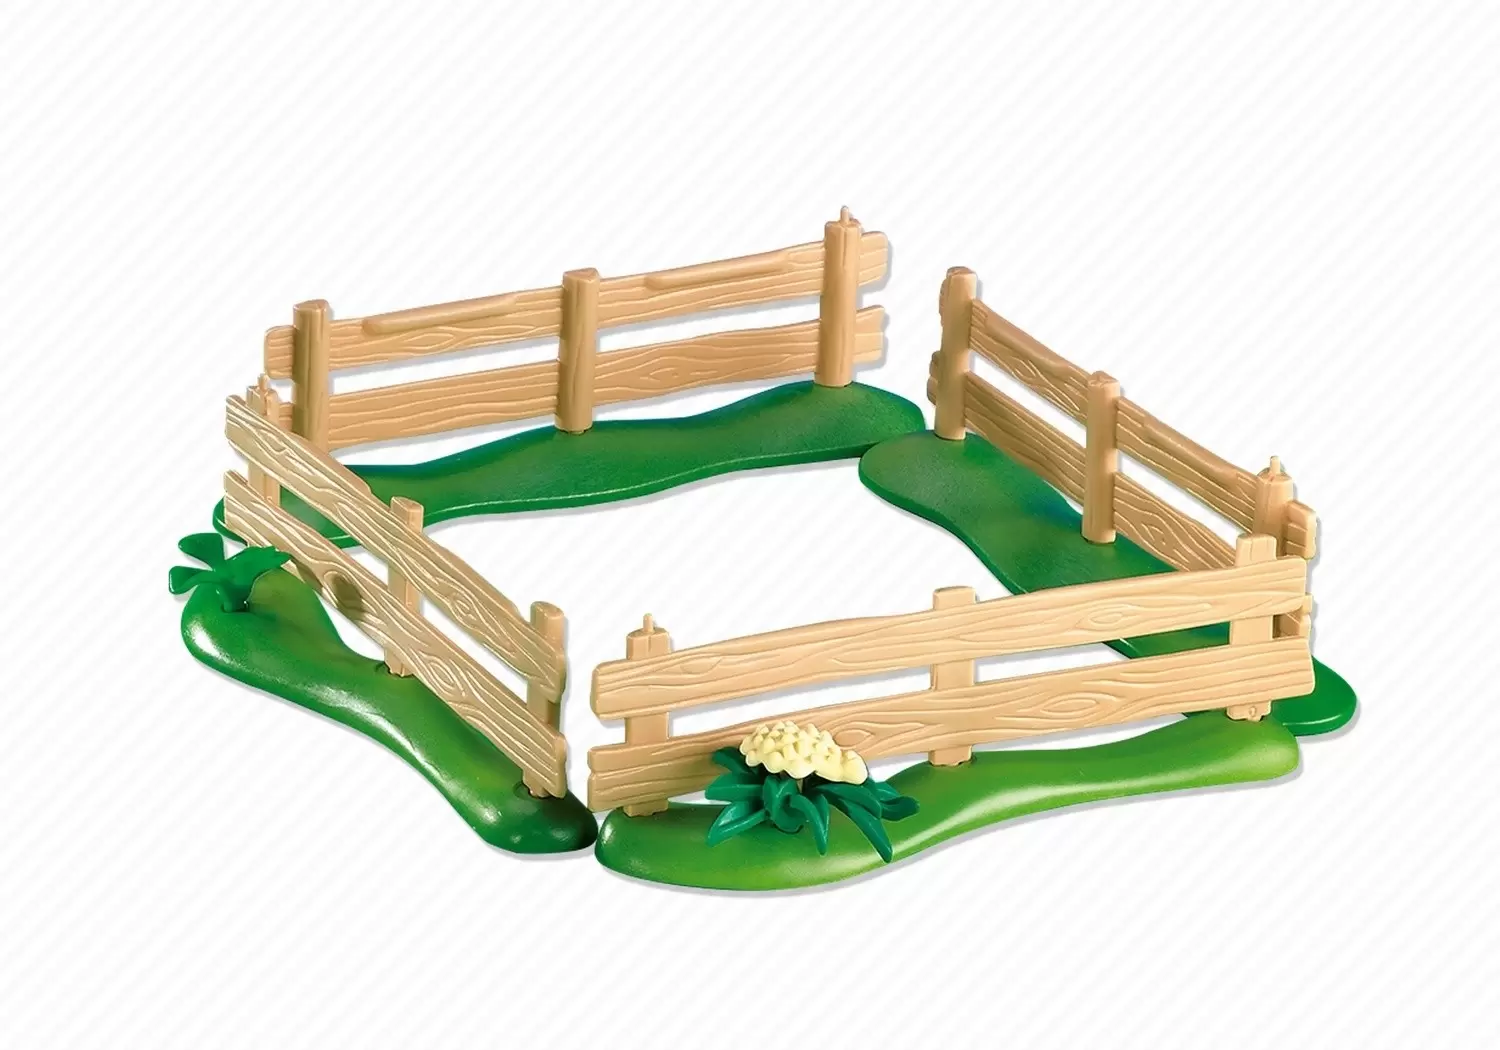 Playmobil Farmers - Wooden Fence